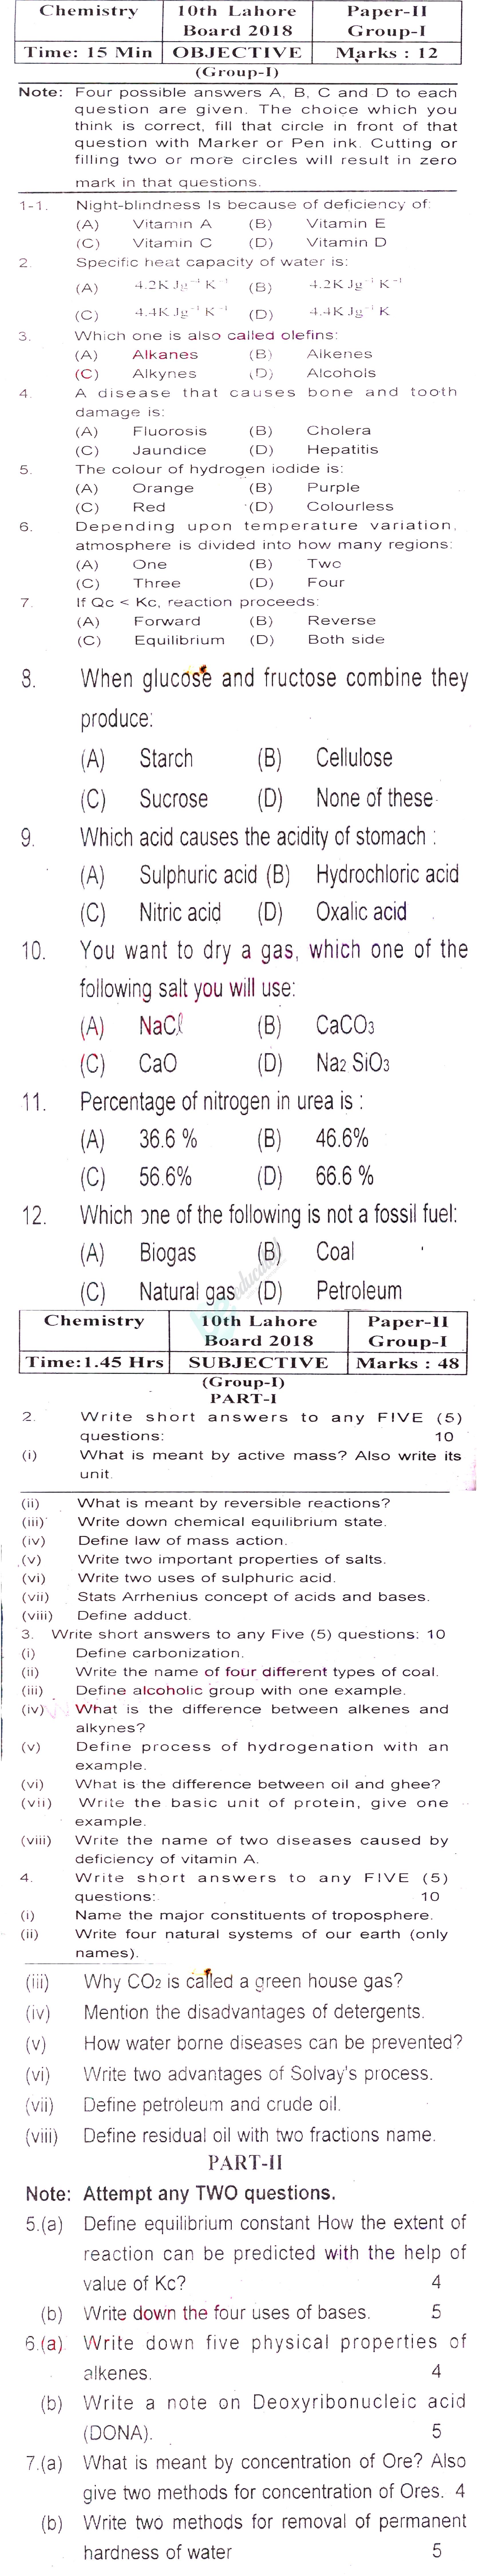 Chemistry 10th English Medium Past Paper Group 1 BISE Lahore 2018